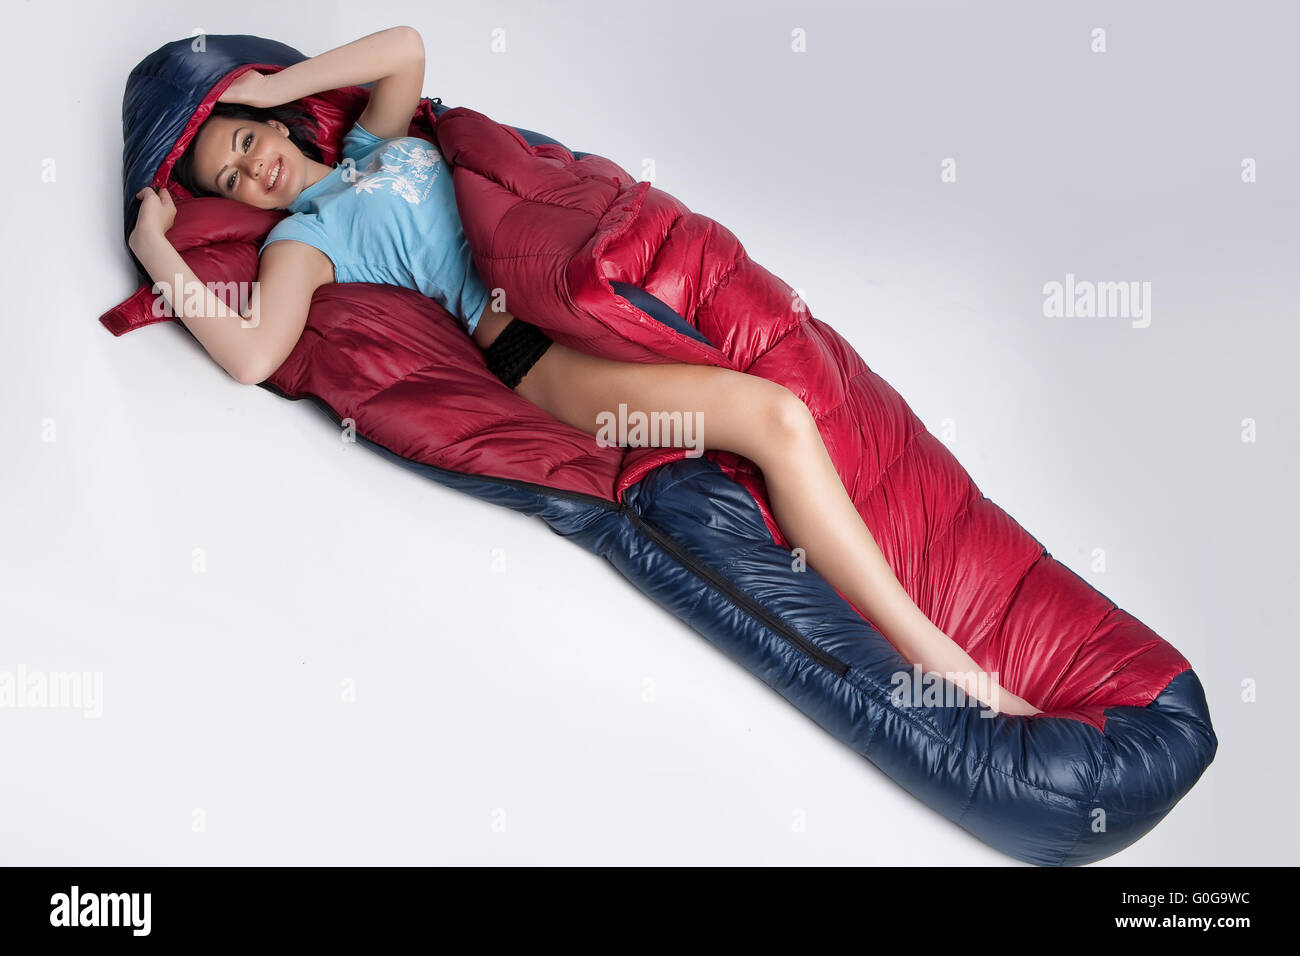 Young Woman In The Sleeping BAg Stock Photo - Alamy